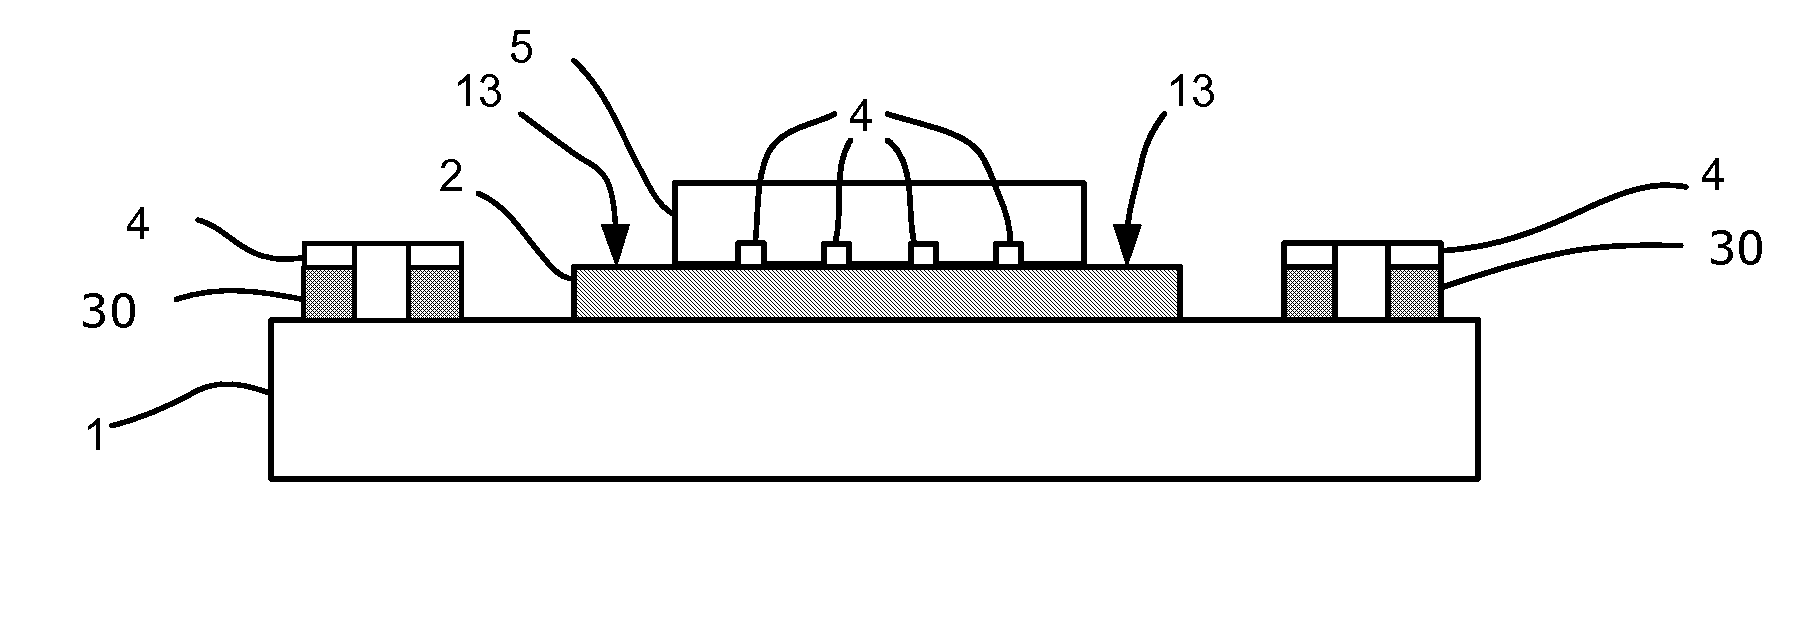 Method For Producing An Electro-Optical Printed Circuit Board With Optical Waveguide Structures